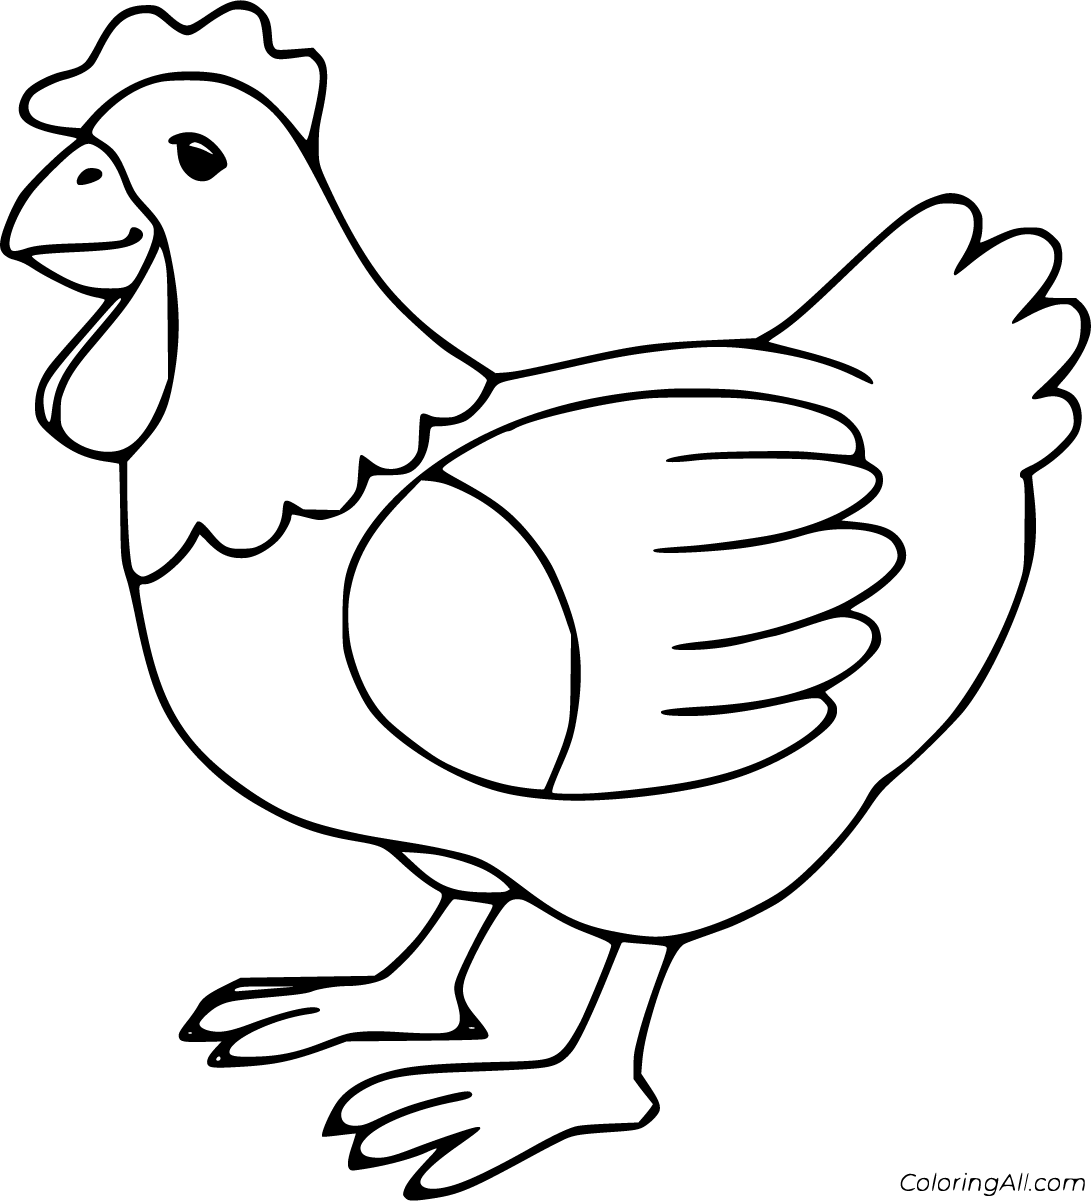 chicken-coloring-pages-coloringall